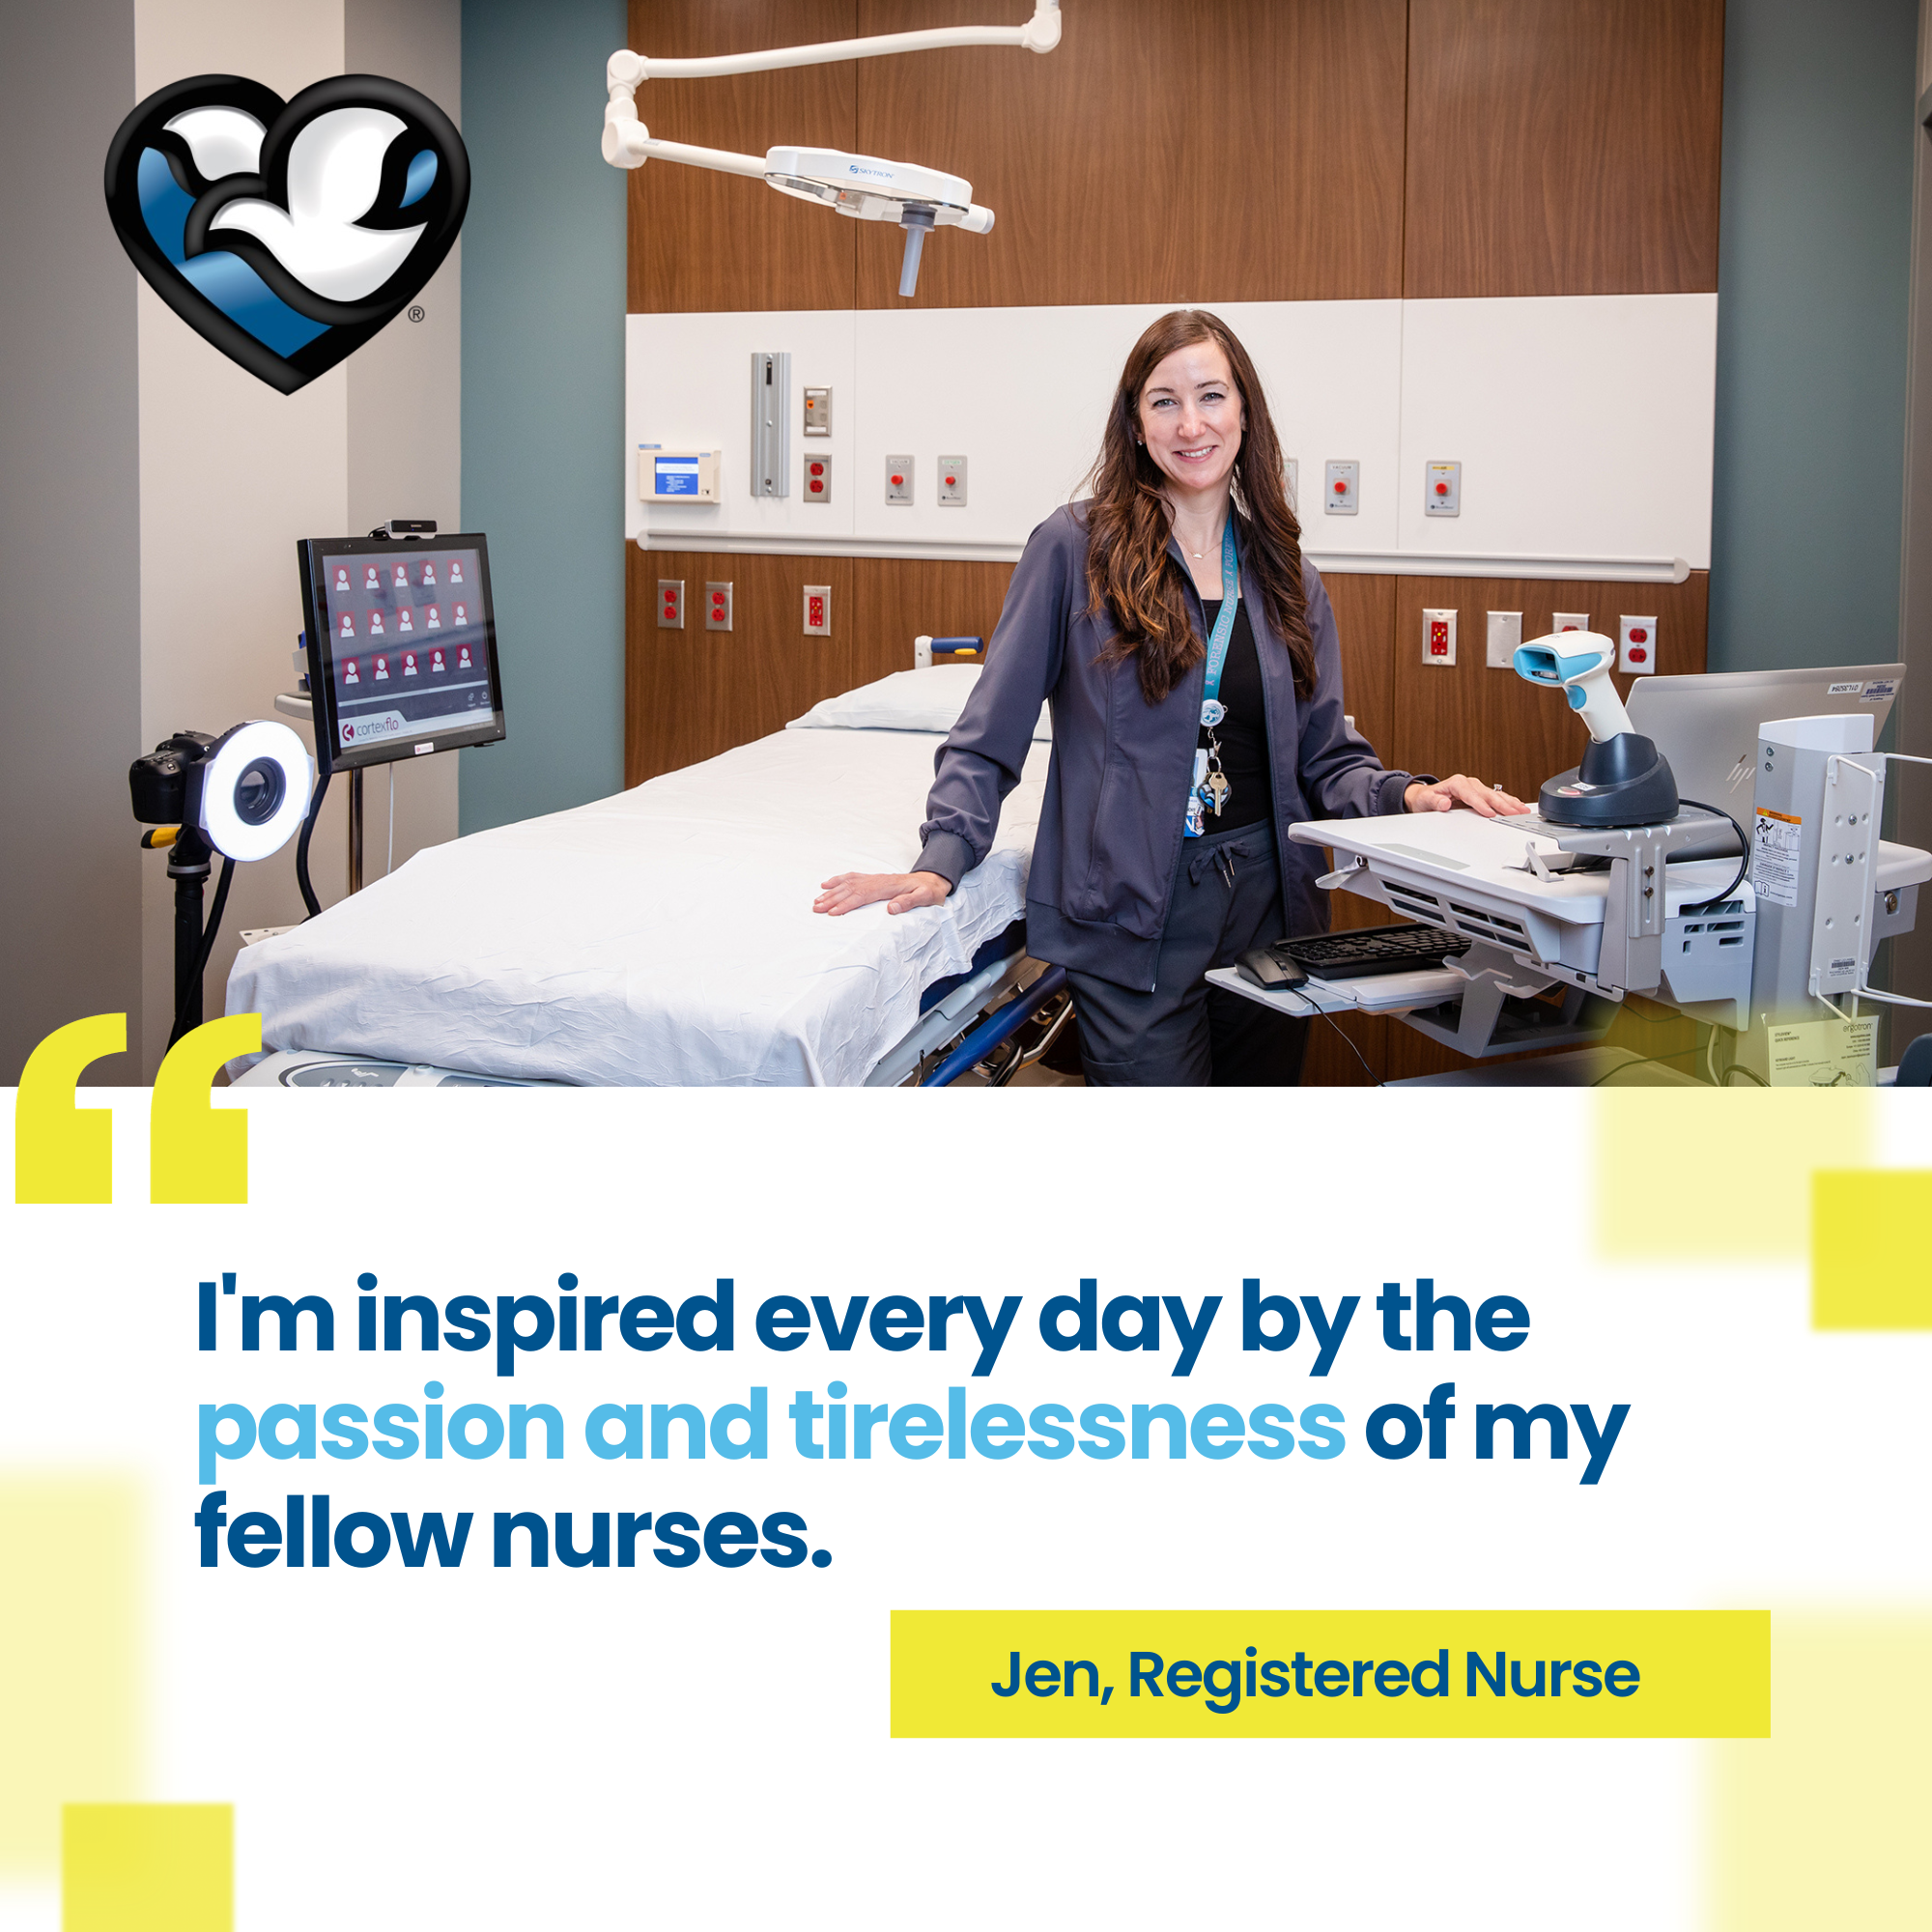 Portrait of and quote from Jen, registered nurse: "I'm inspired every day by the passion and tirelessness of my fellow nurses."